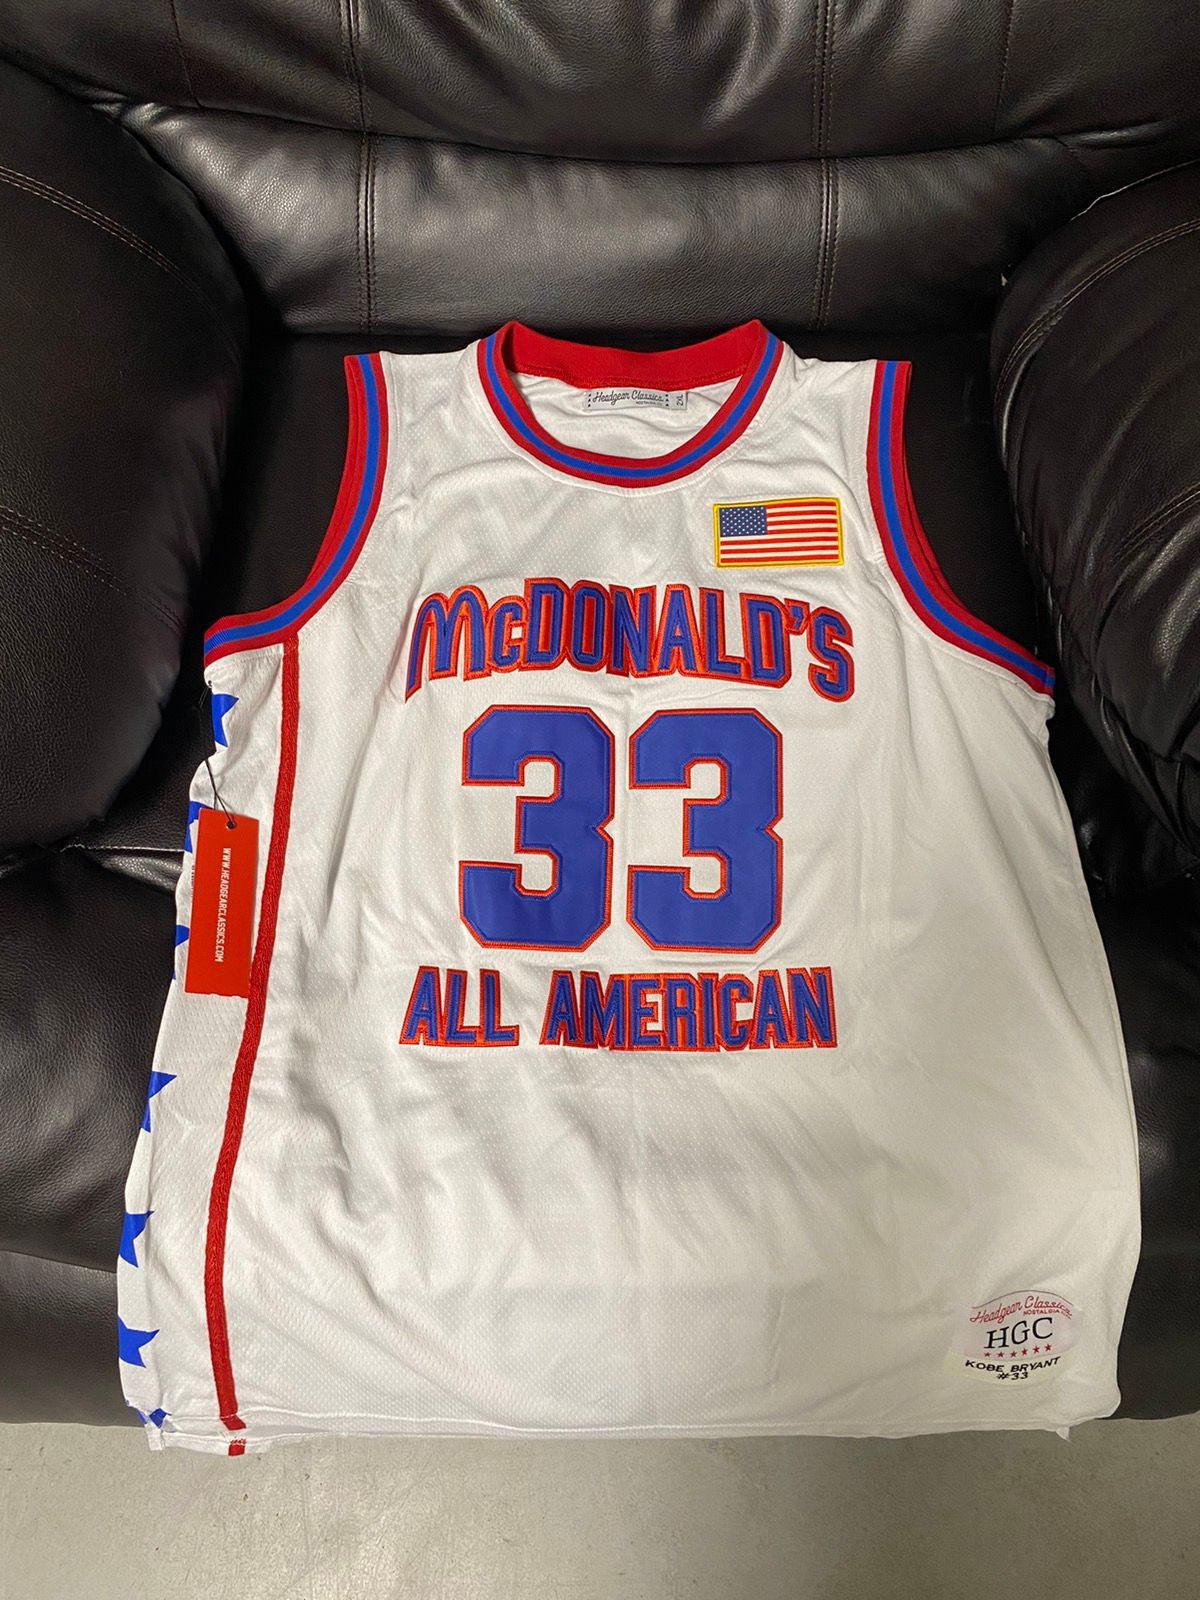 McDonalds All American Kobe Bryant Jersey M for Sale in Peabody, MA -  OfferUp